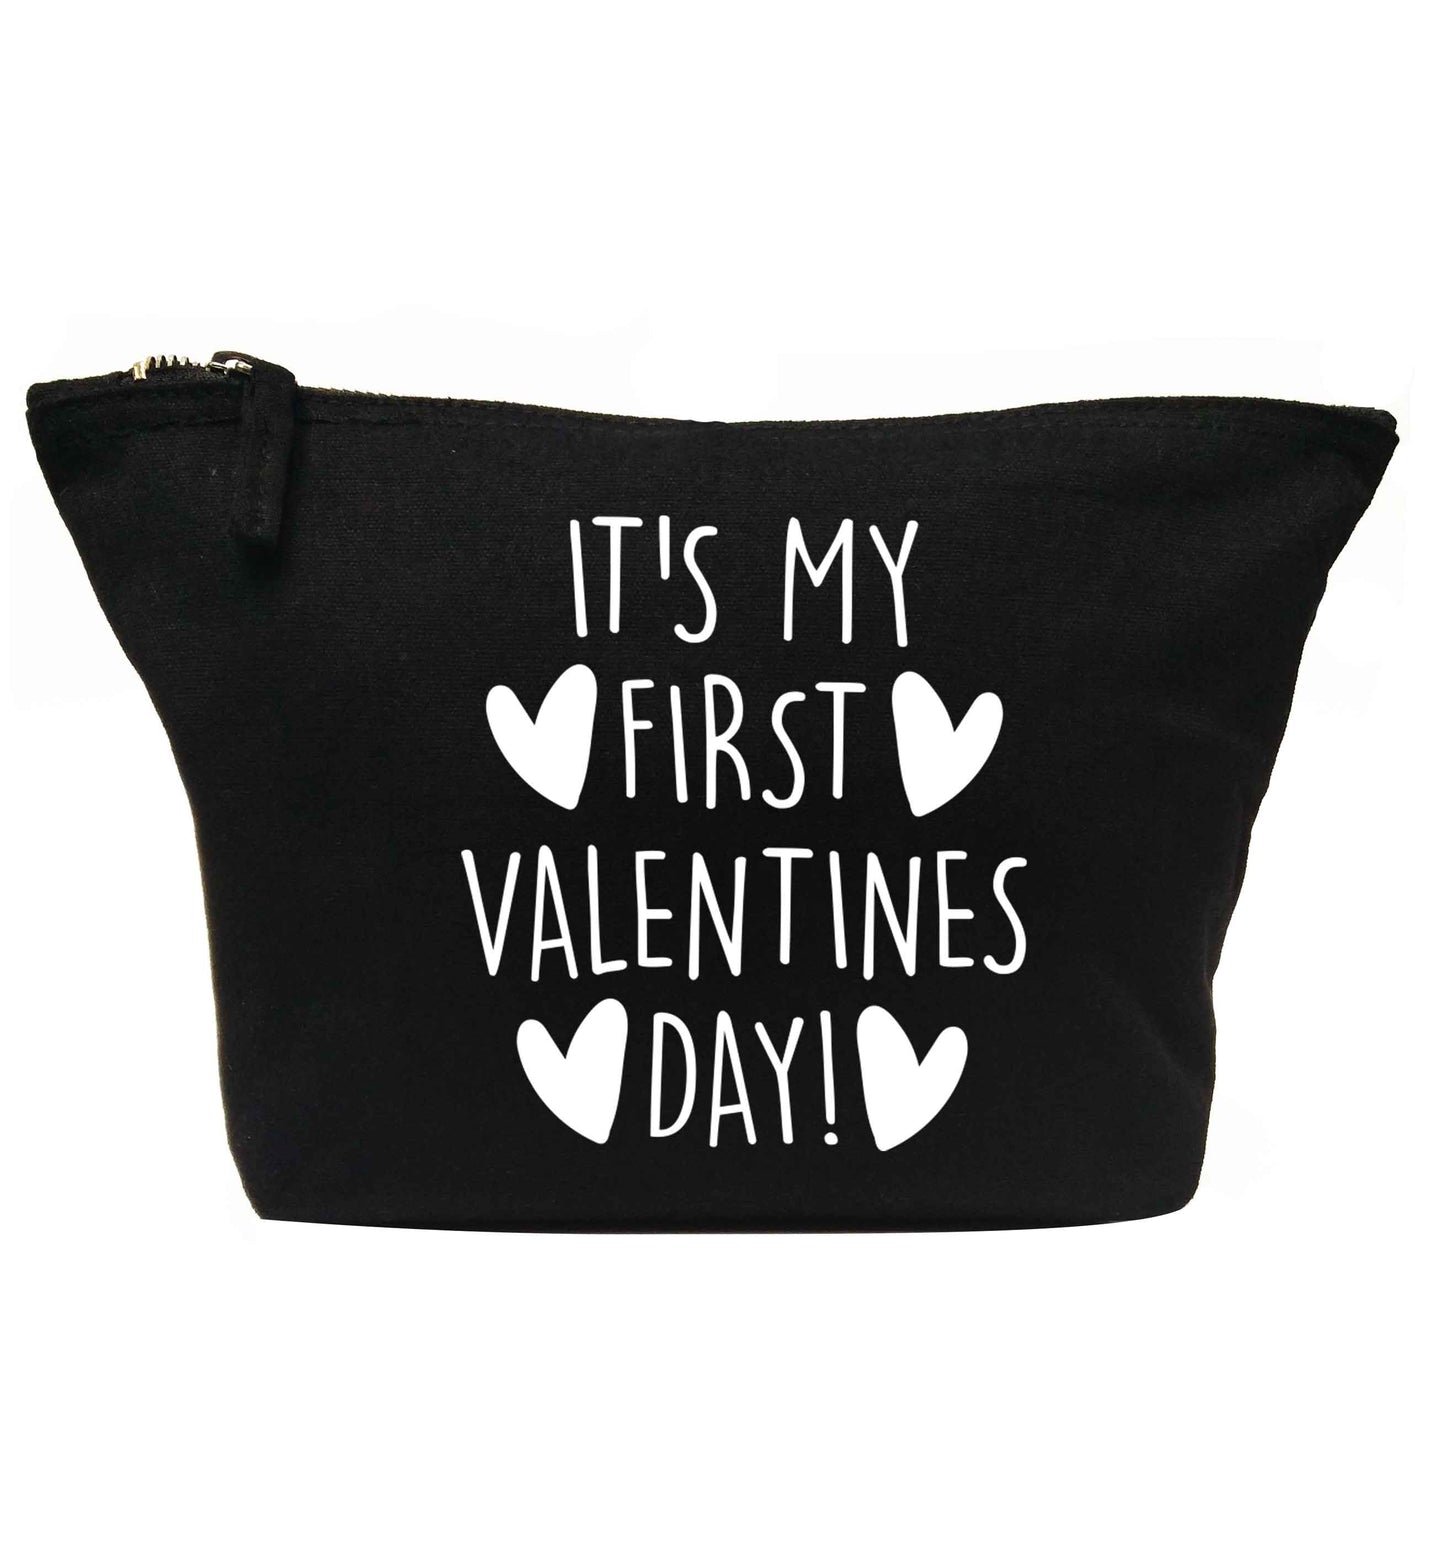 It's my first valentines day! | Makeup / wash bag